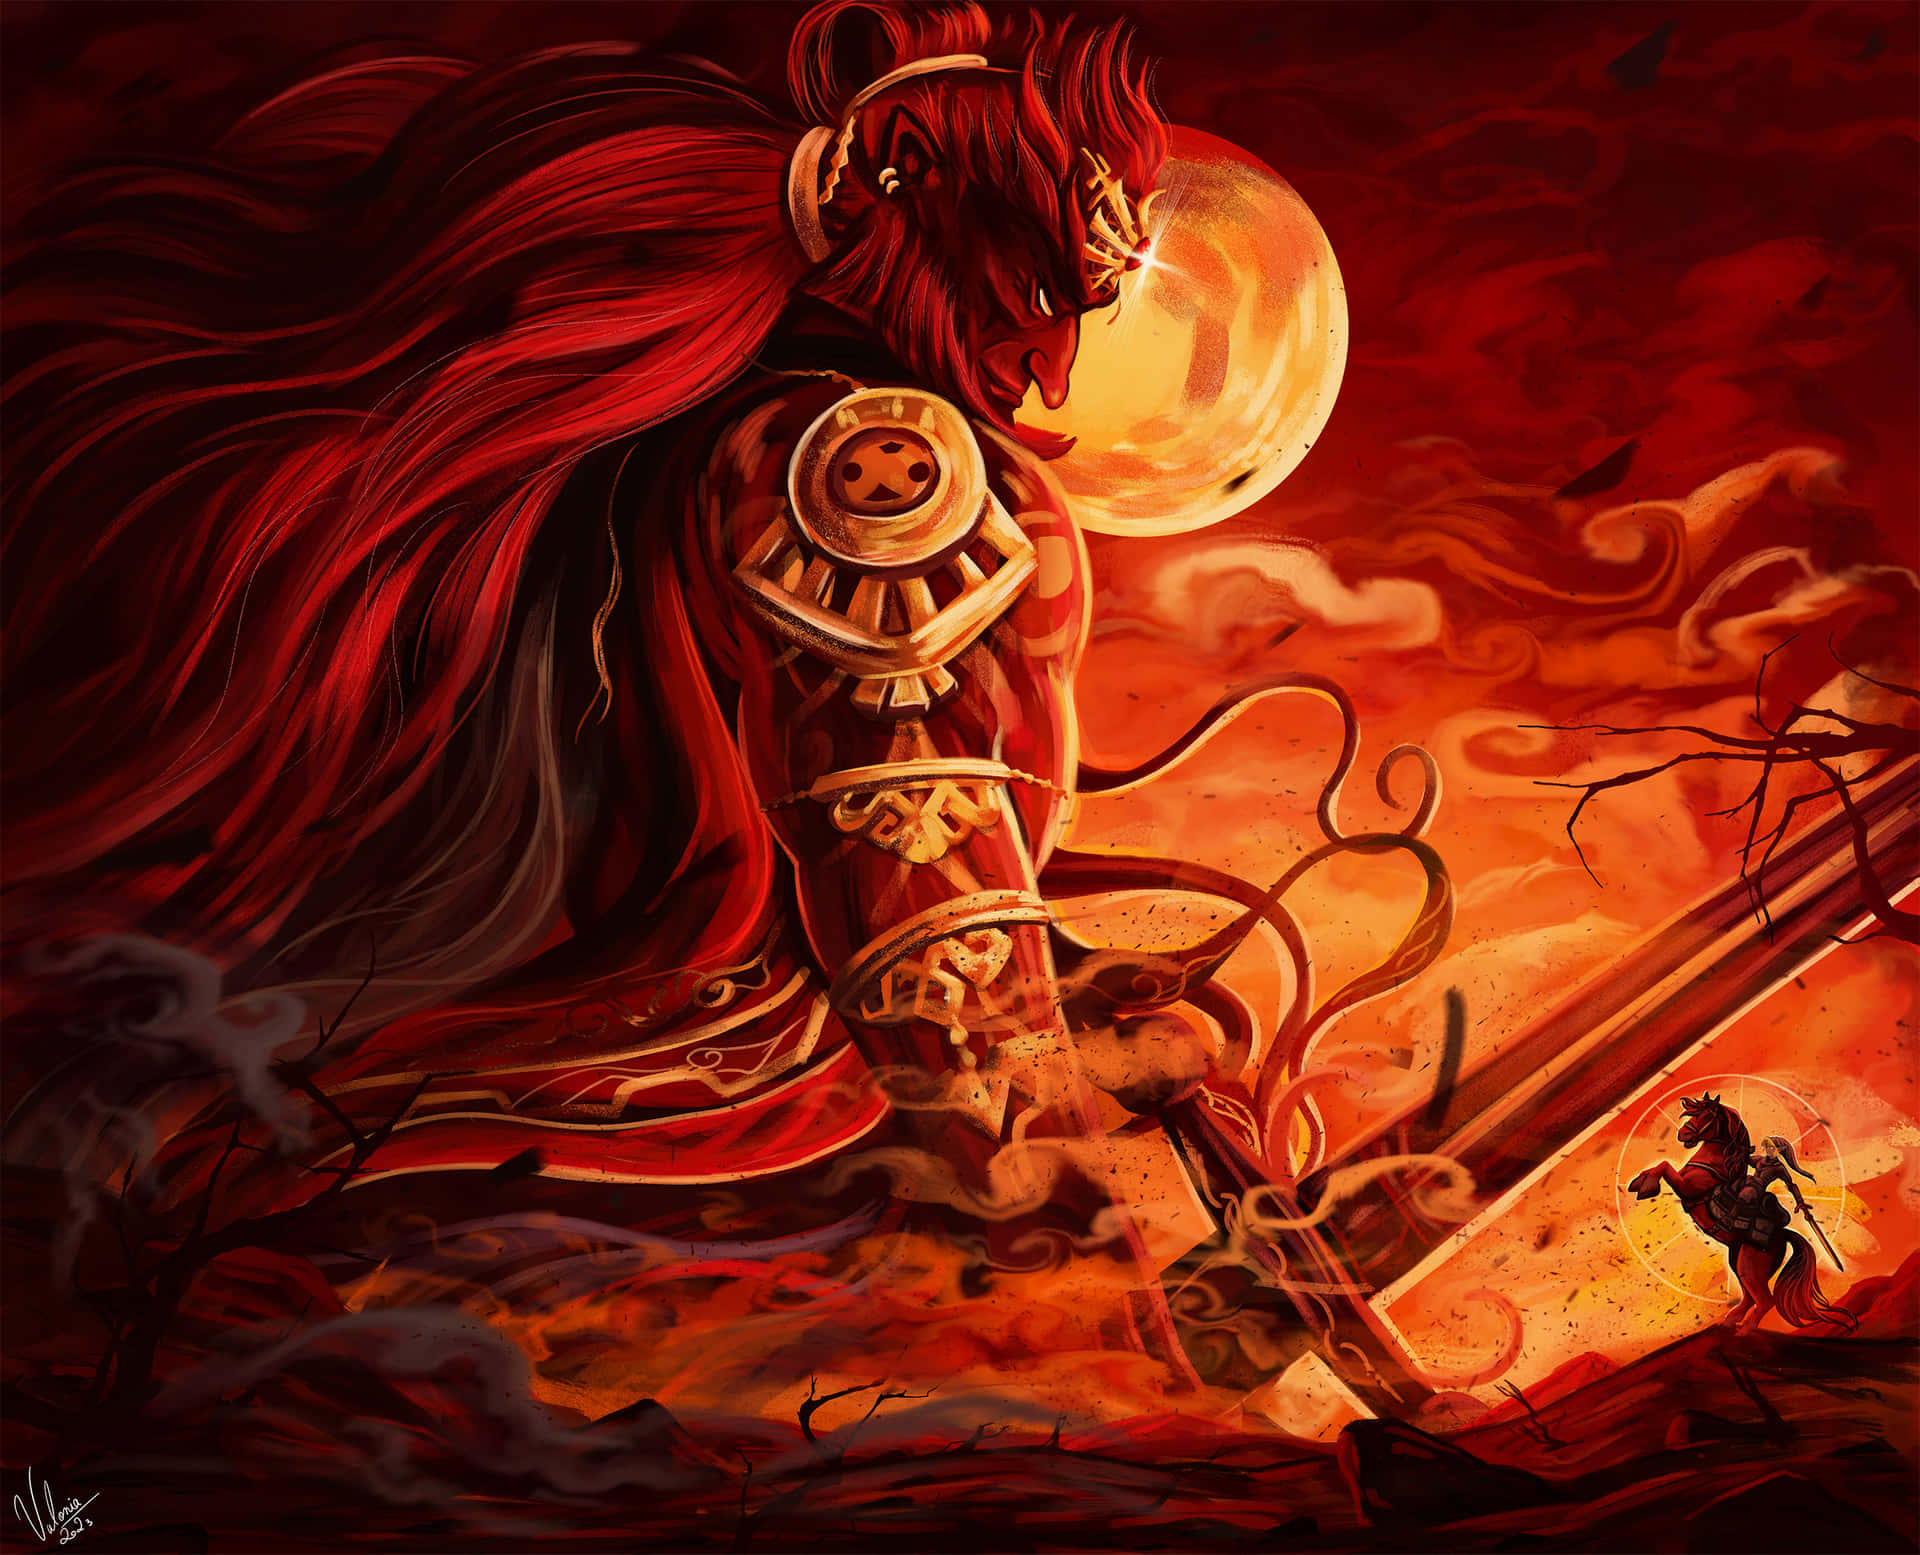 The powerful Ganondorf looms over a dark, fiery landscape in this stunning video game artwork. Wallpaper